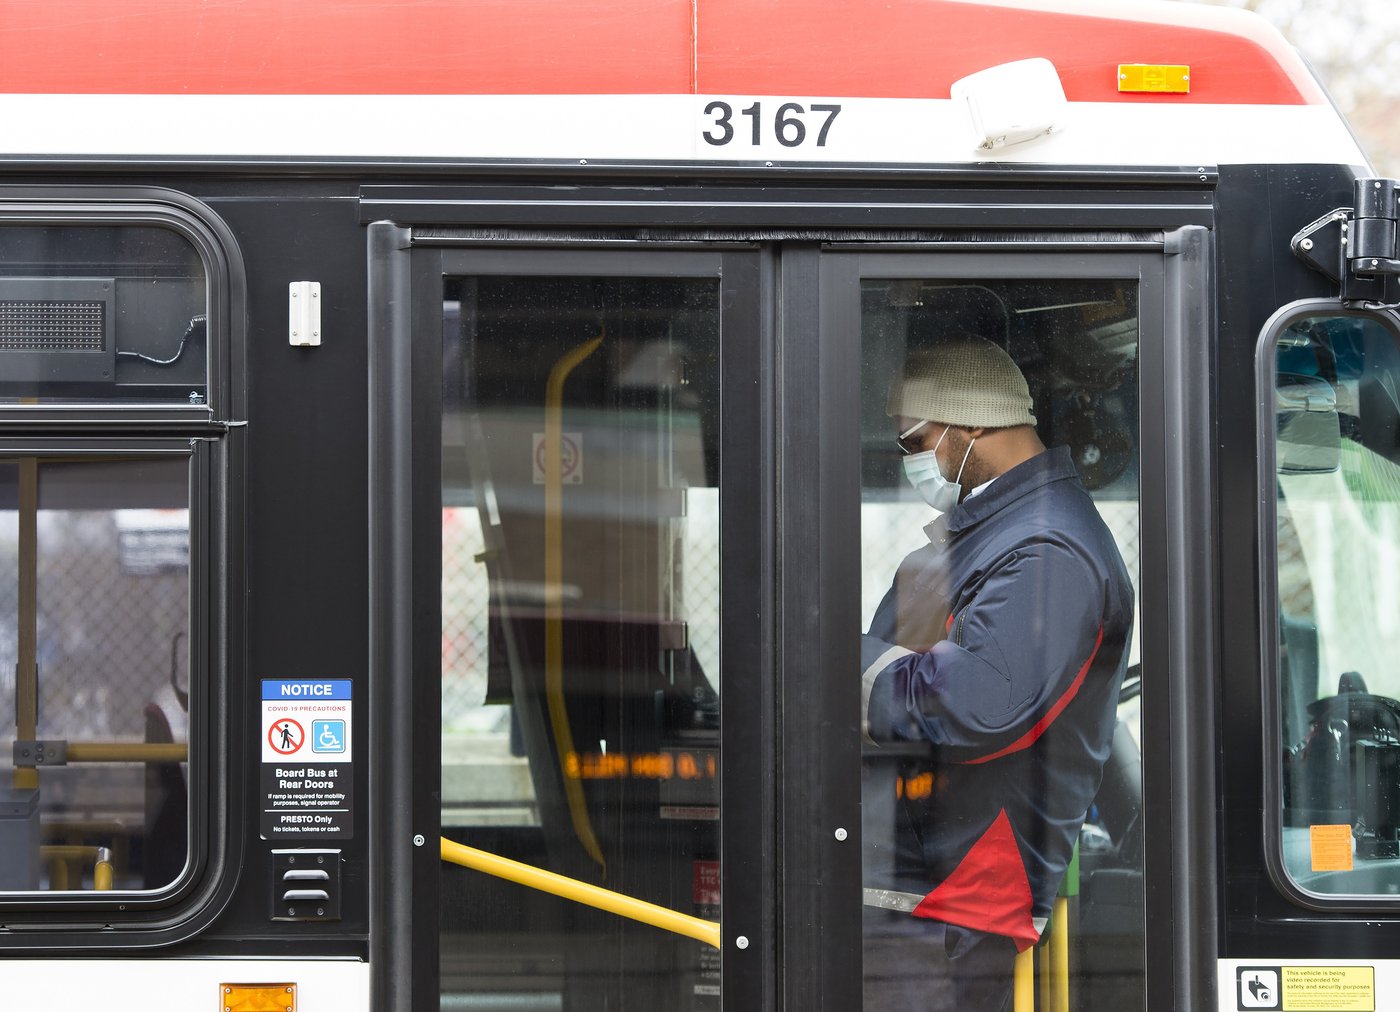 Violence against Toronto transit workers